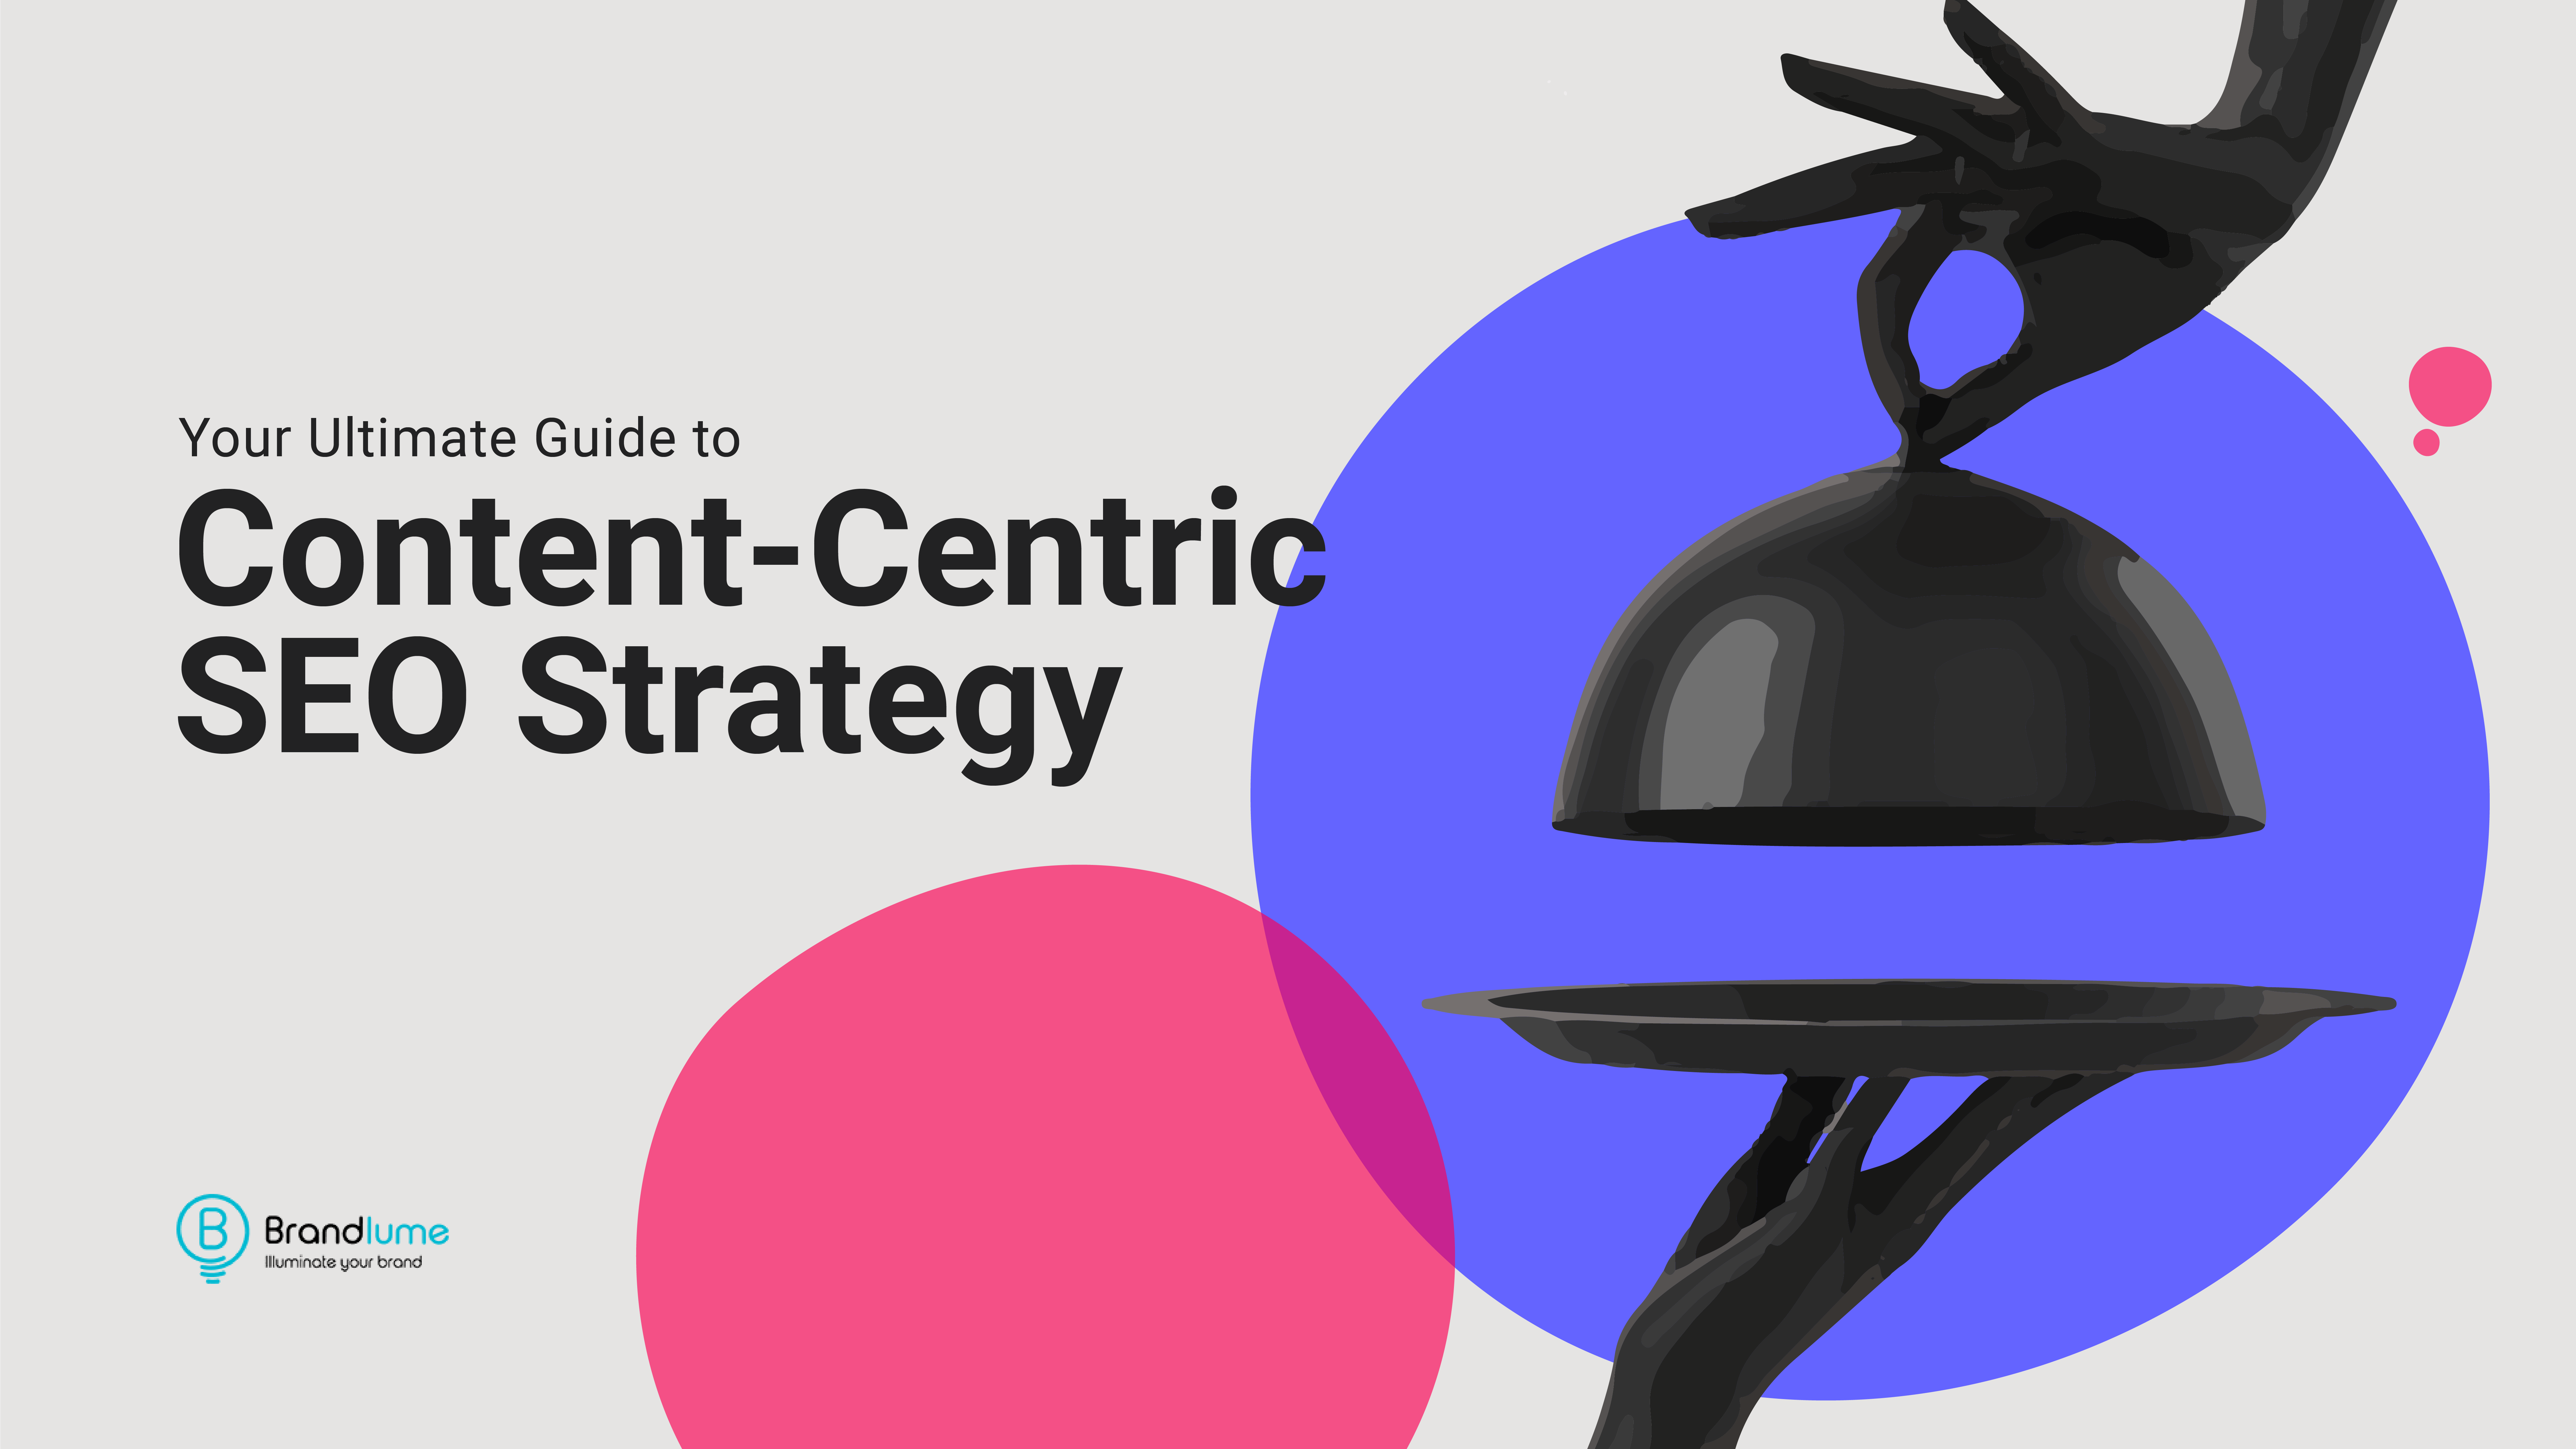 Your Ultimate Guide to Content-Centric SEO Strategy